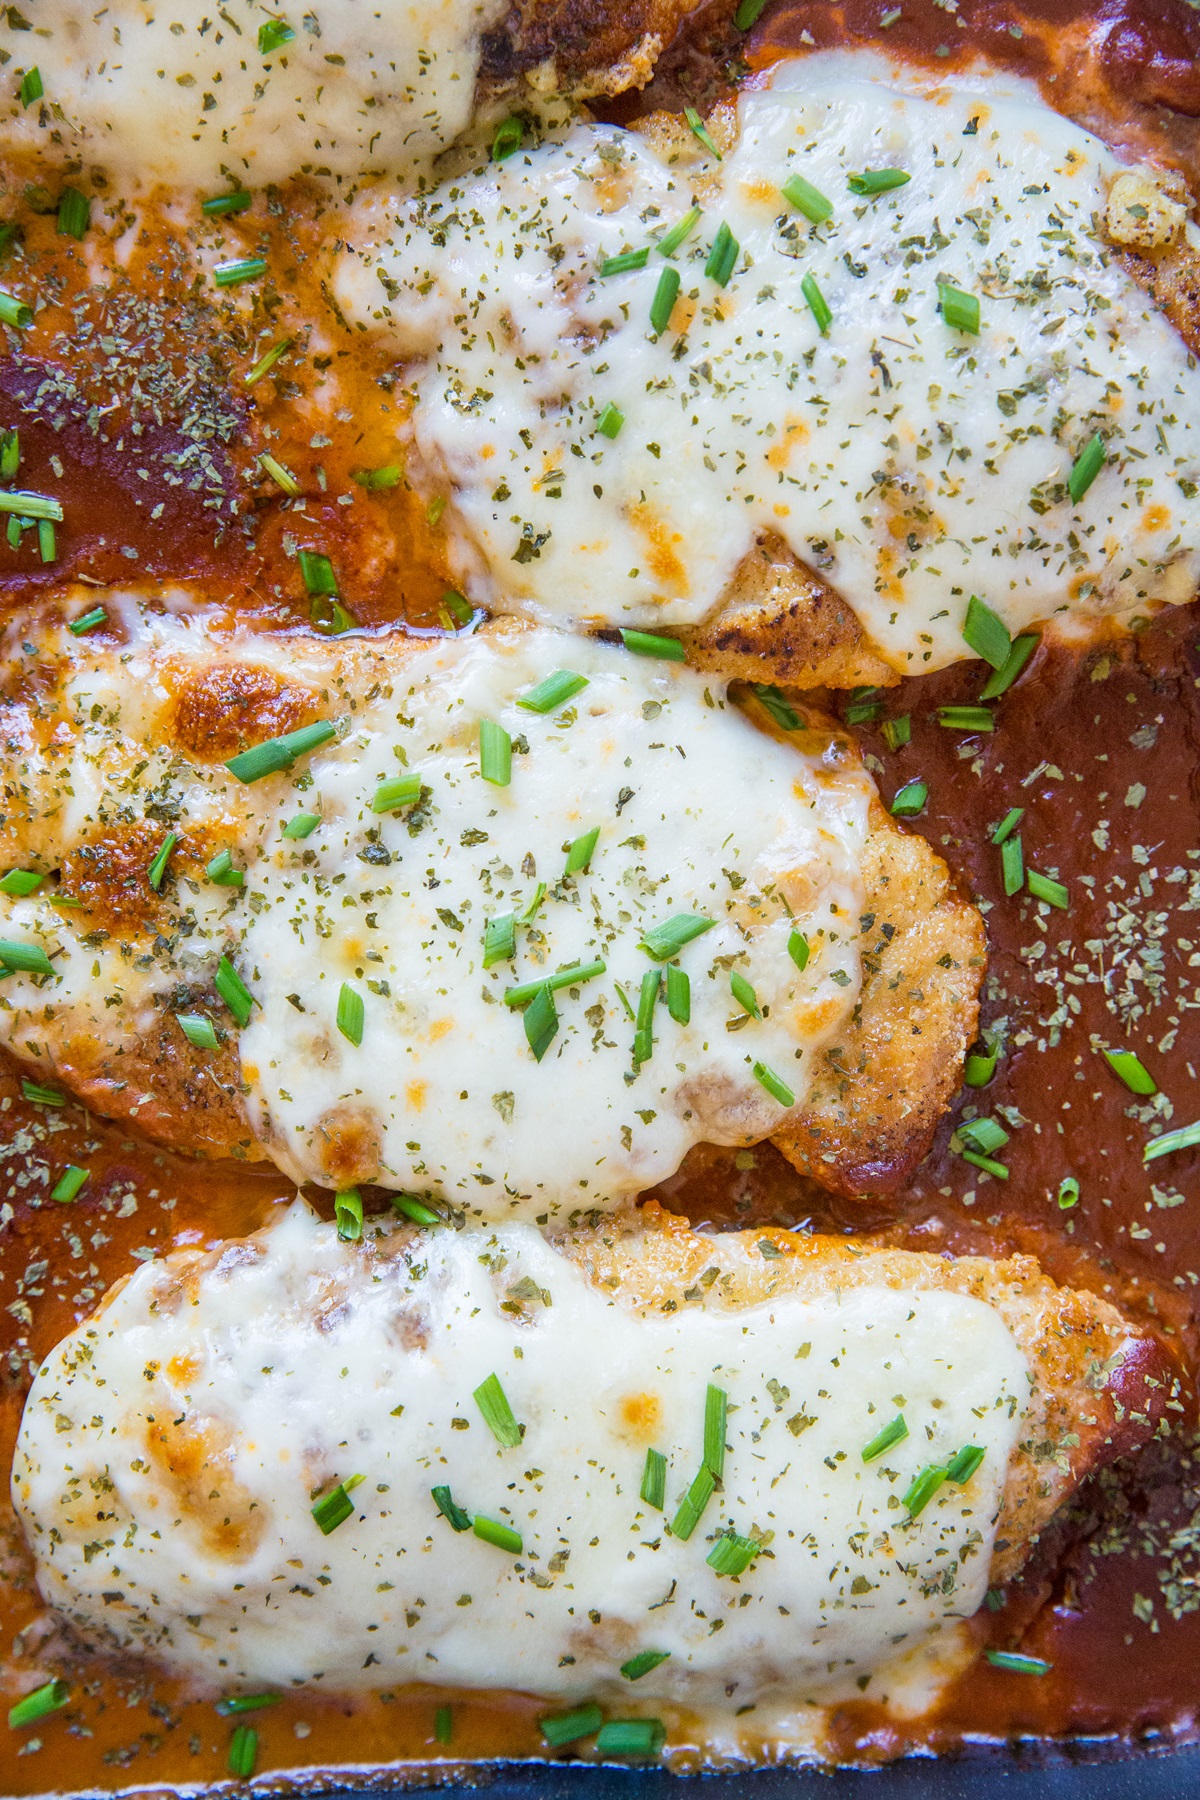 Grain-Free Low-Carb Keto Chicken Parmesan made with almond flour - gluten-free and delicious!